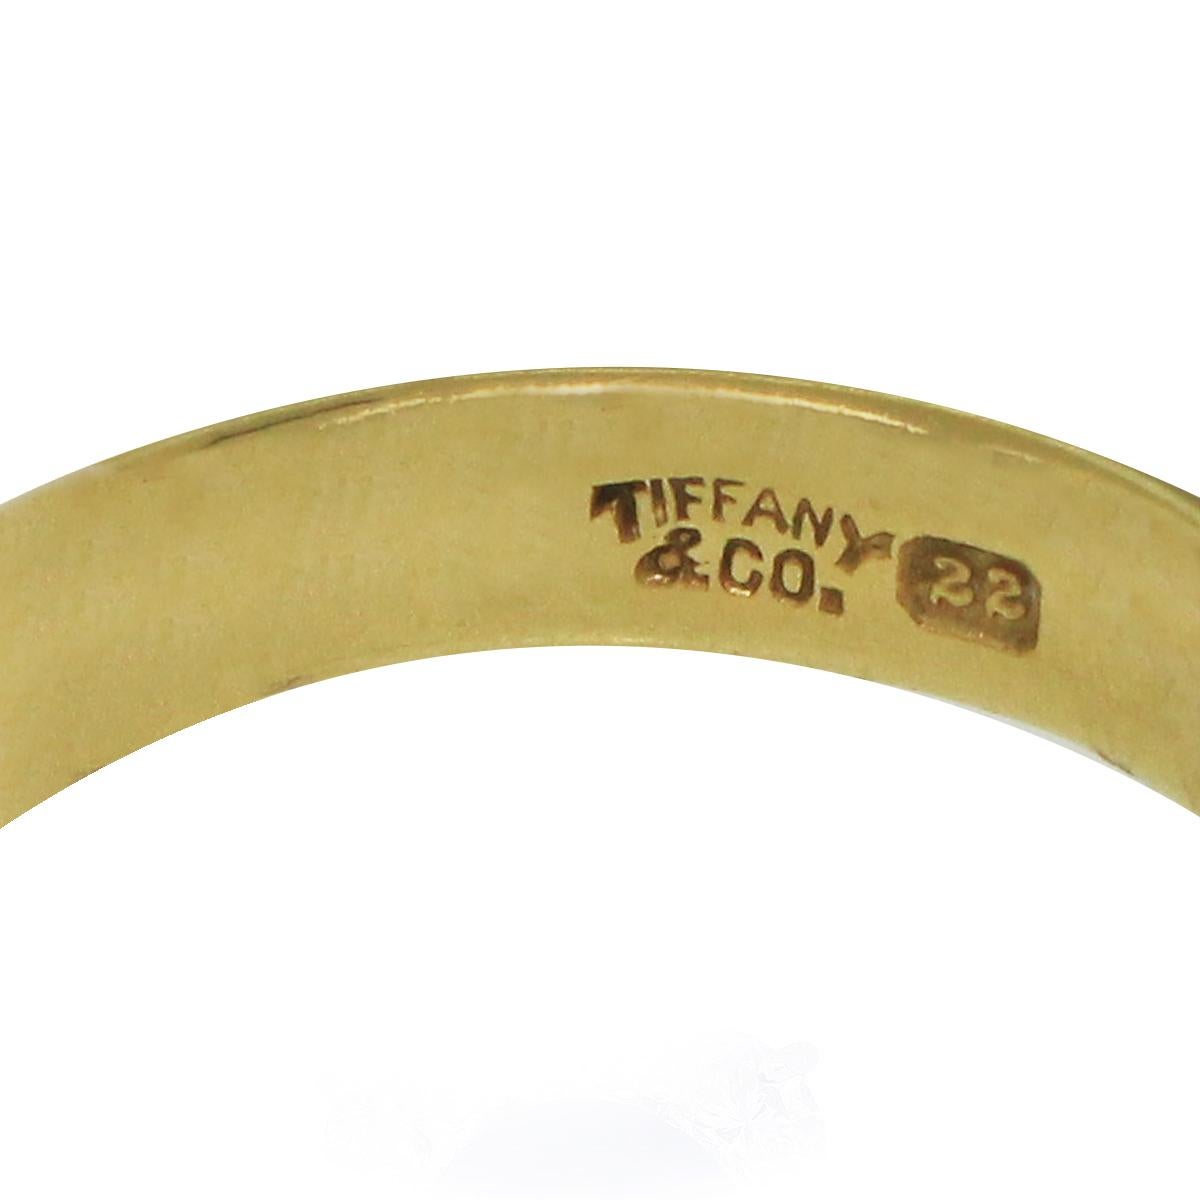 Brand: Tiffany & Co.
Material: 22k Yellow Gold
Ring Size: 6
Total Weight: 6.2g (4dwt)
Measurements: 0.89